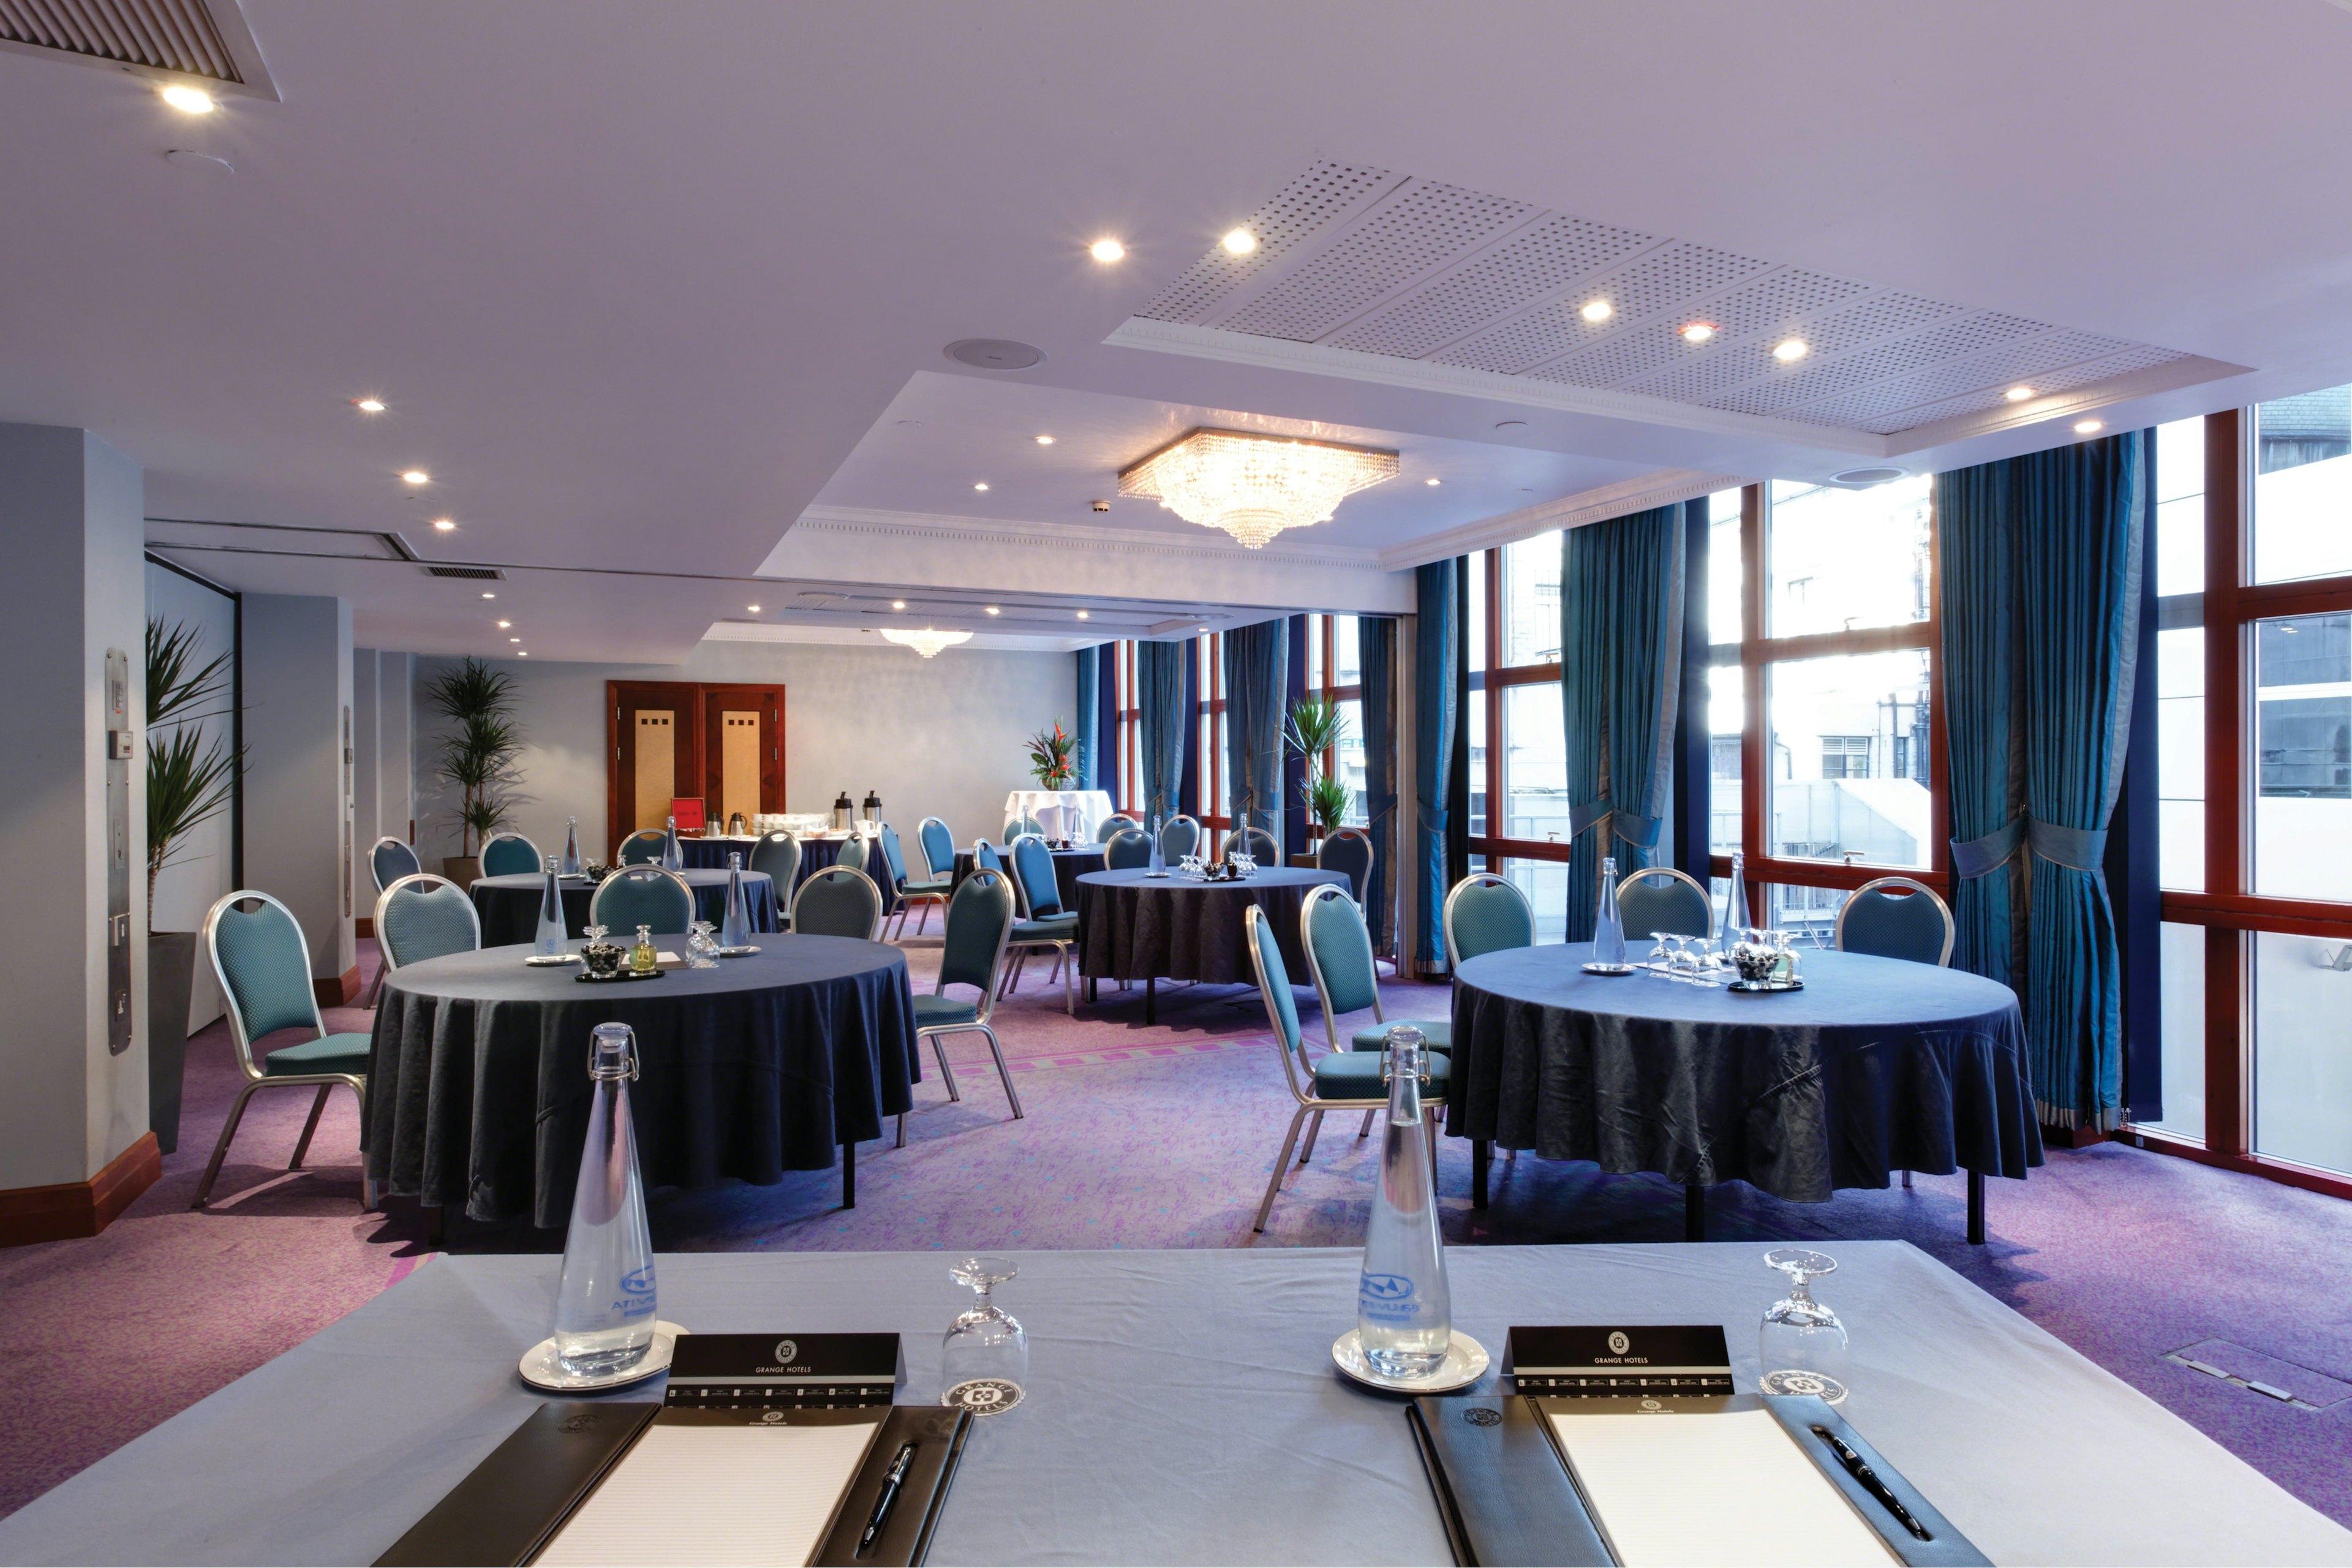 Conference Hotels - Jurys Inn London Holborn - Events in Perseus Suite - Banner